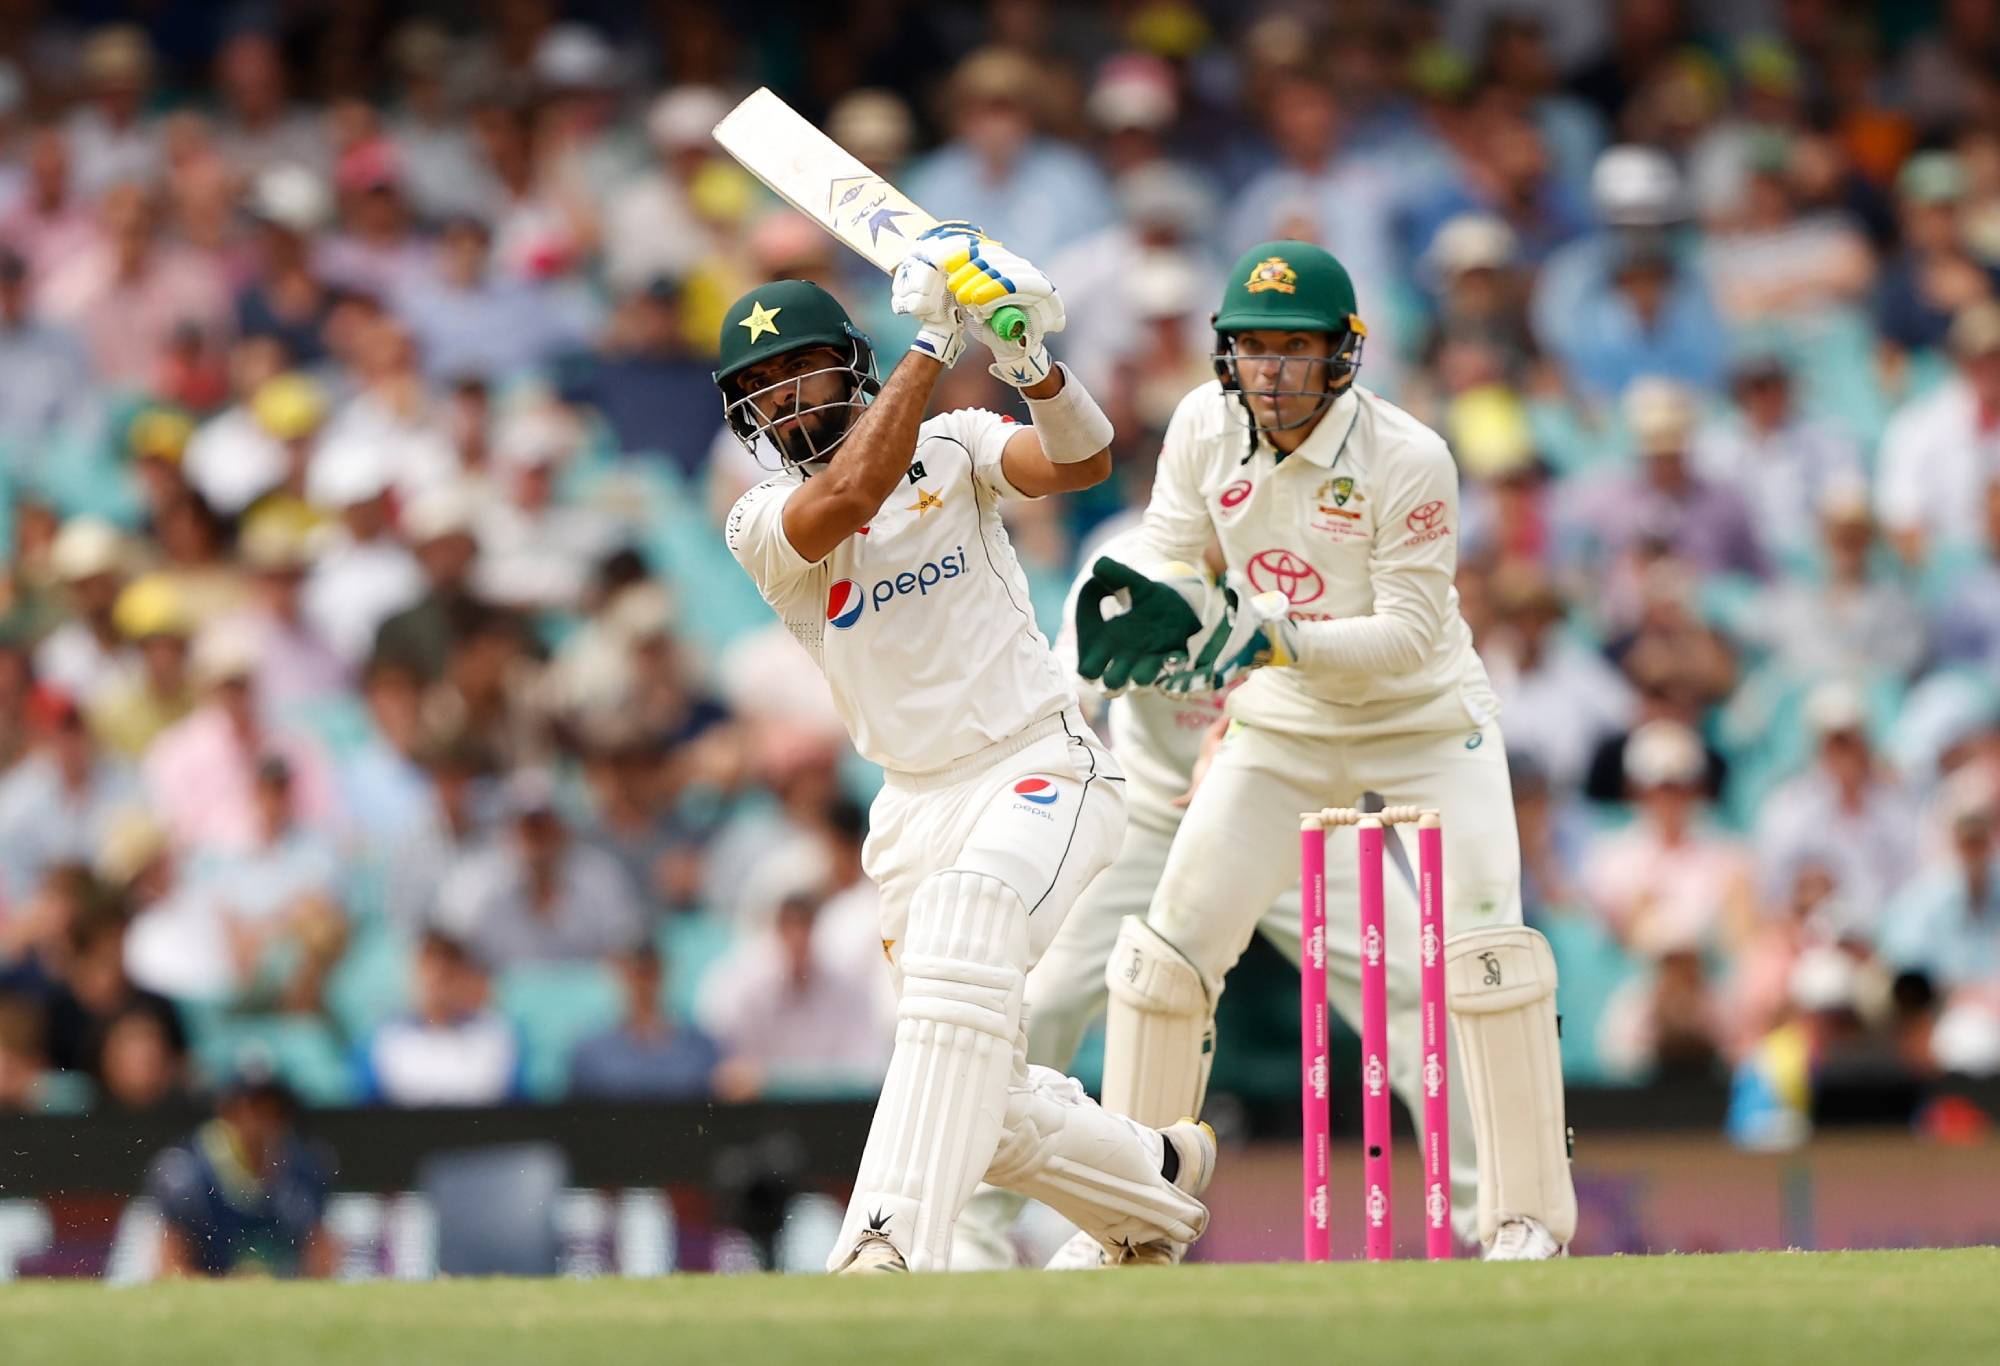 SYDNEY, AUSTRALIA - JANUARY 03: Aamer Jamal of Pakistan plays a shot during day one of the Men's Third Test Match in the series between Australia and Pakistan at Sydney Cricket Ground on January 03, 2024 in Sydney, Australia. (Photo by Darrian Traynor/Getty Images)